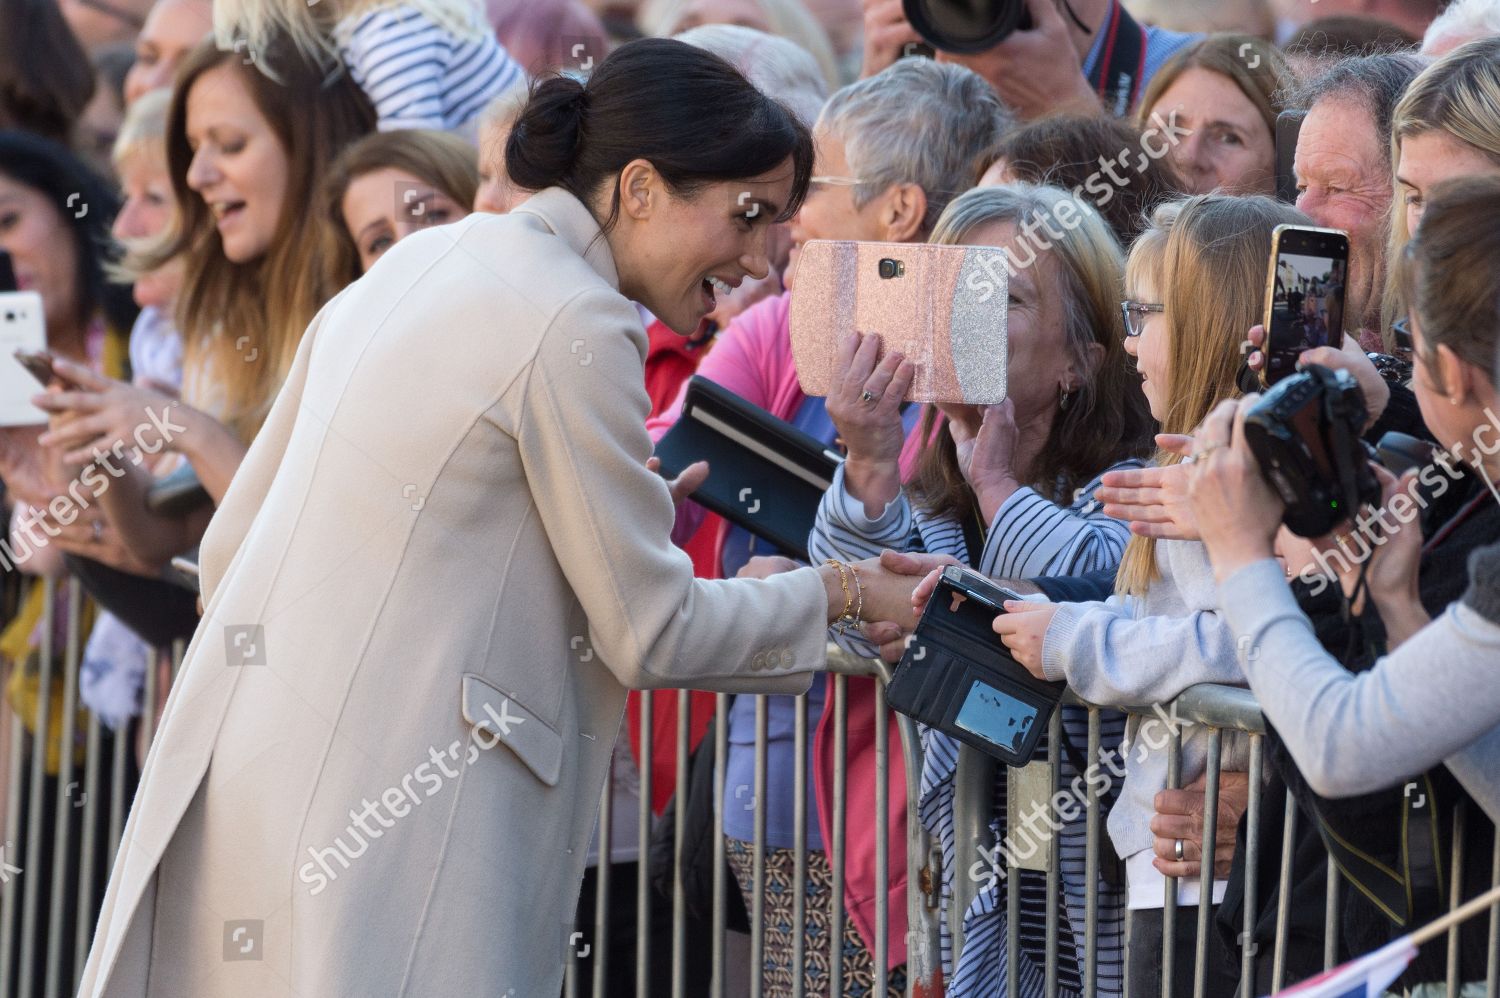 prince-harry-and-meghan-duchess-of-sussex-visit-to-sussex-shutterstock-editorial-9912872a.jpg